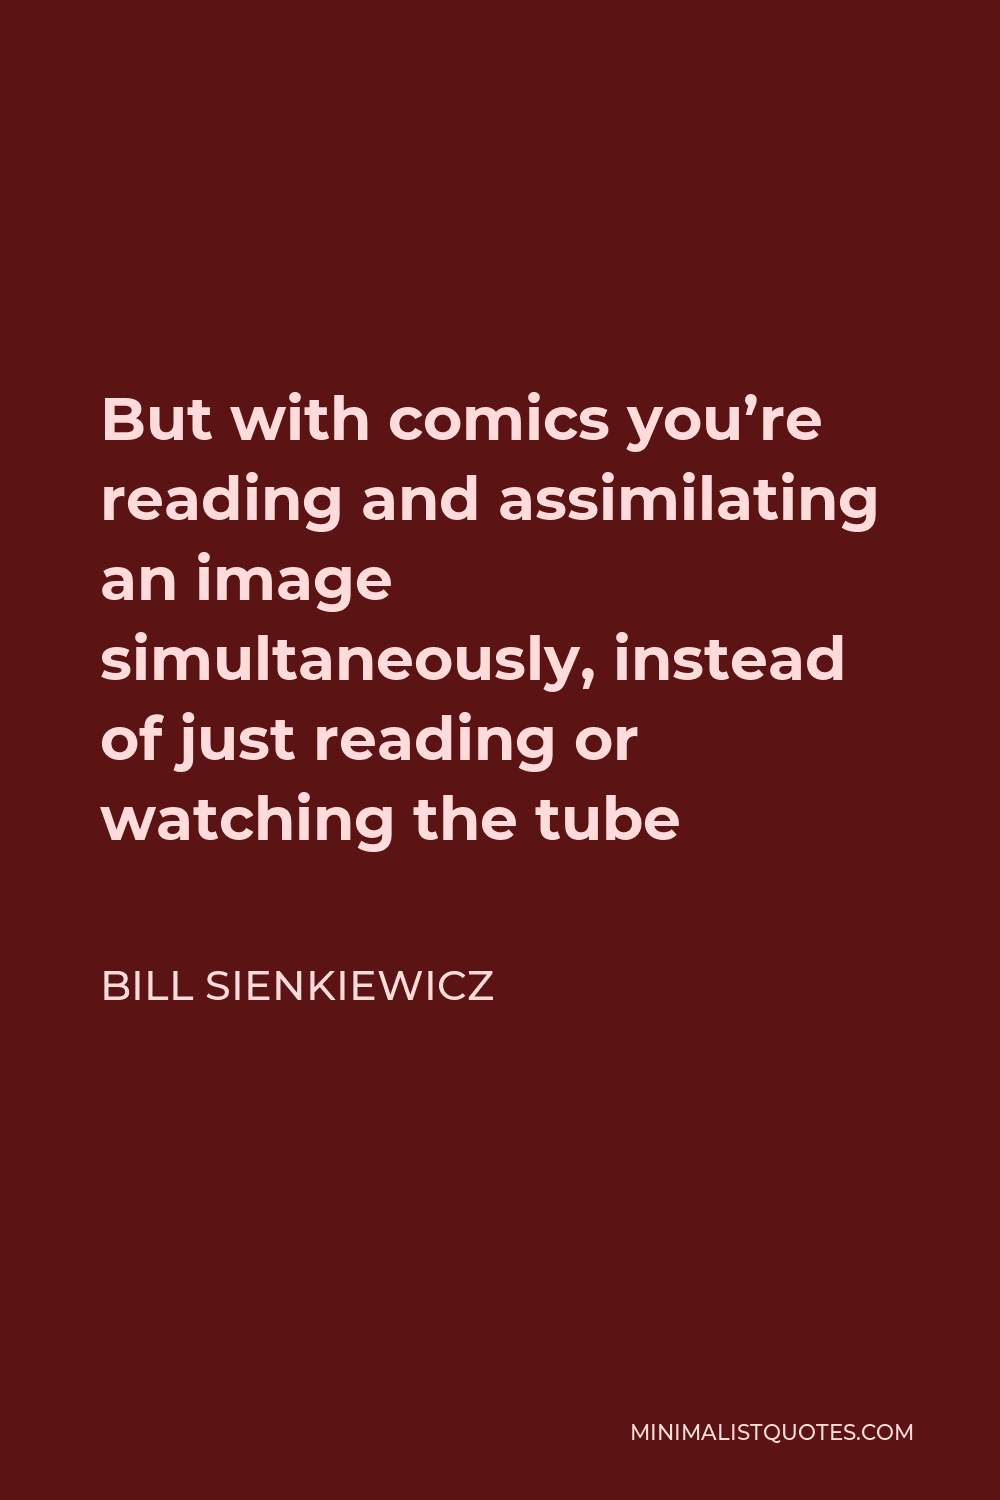 Bill Sienkiewicz Quote - But with comics you’re reading and assimilating an image simultaneously, instead of just reading or watching the tube